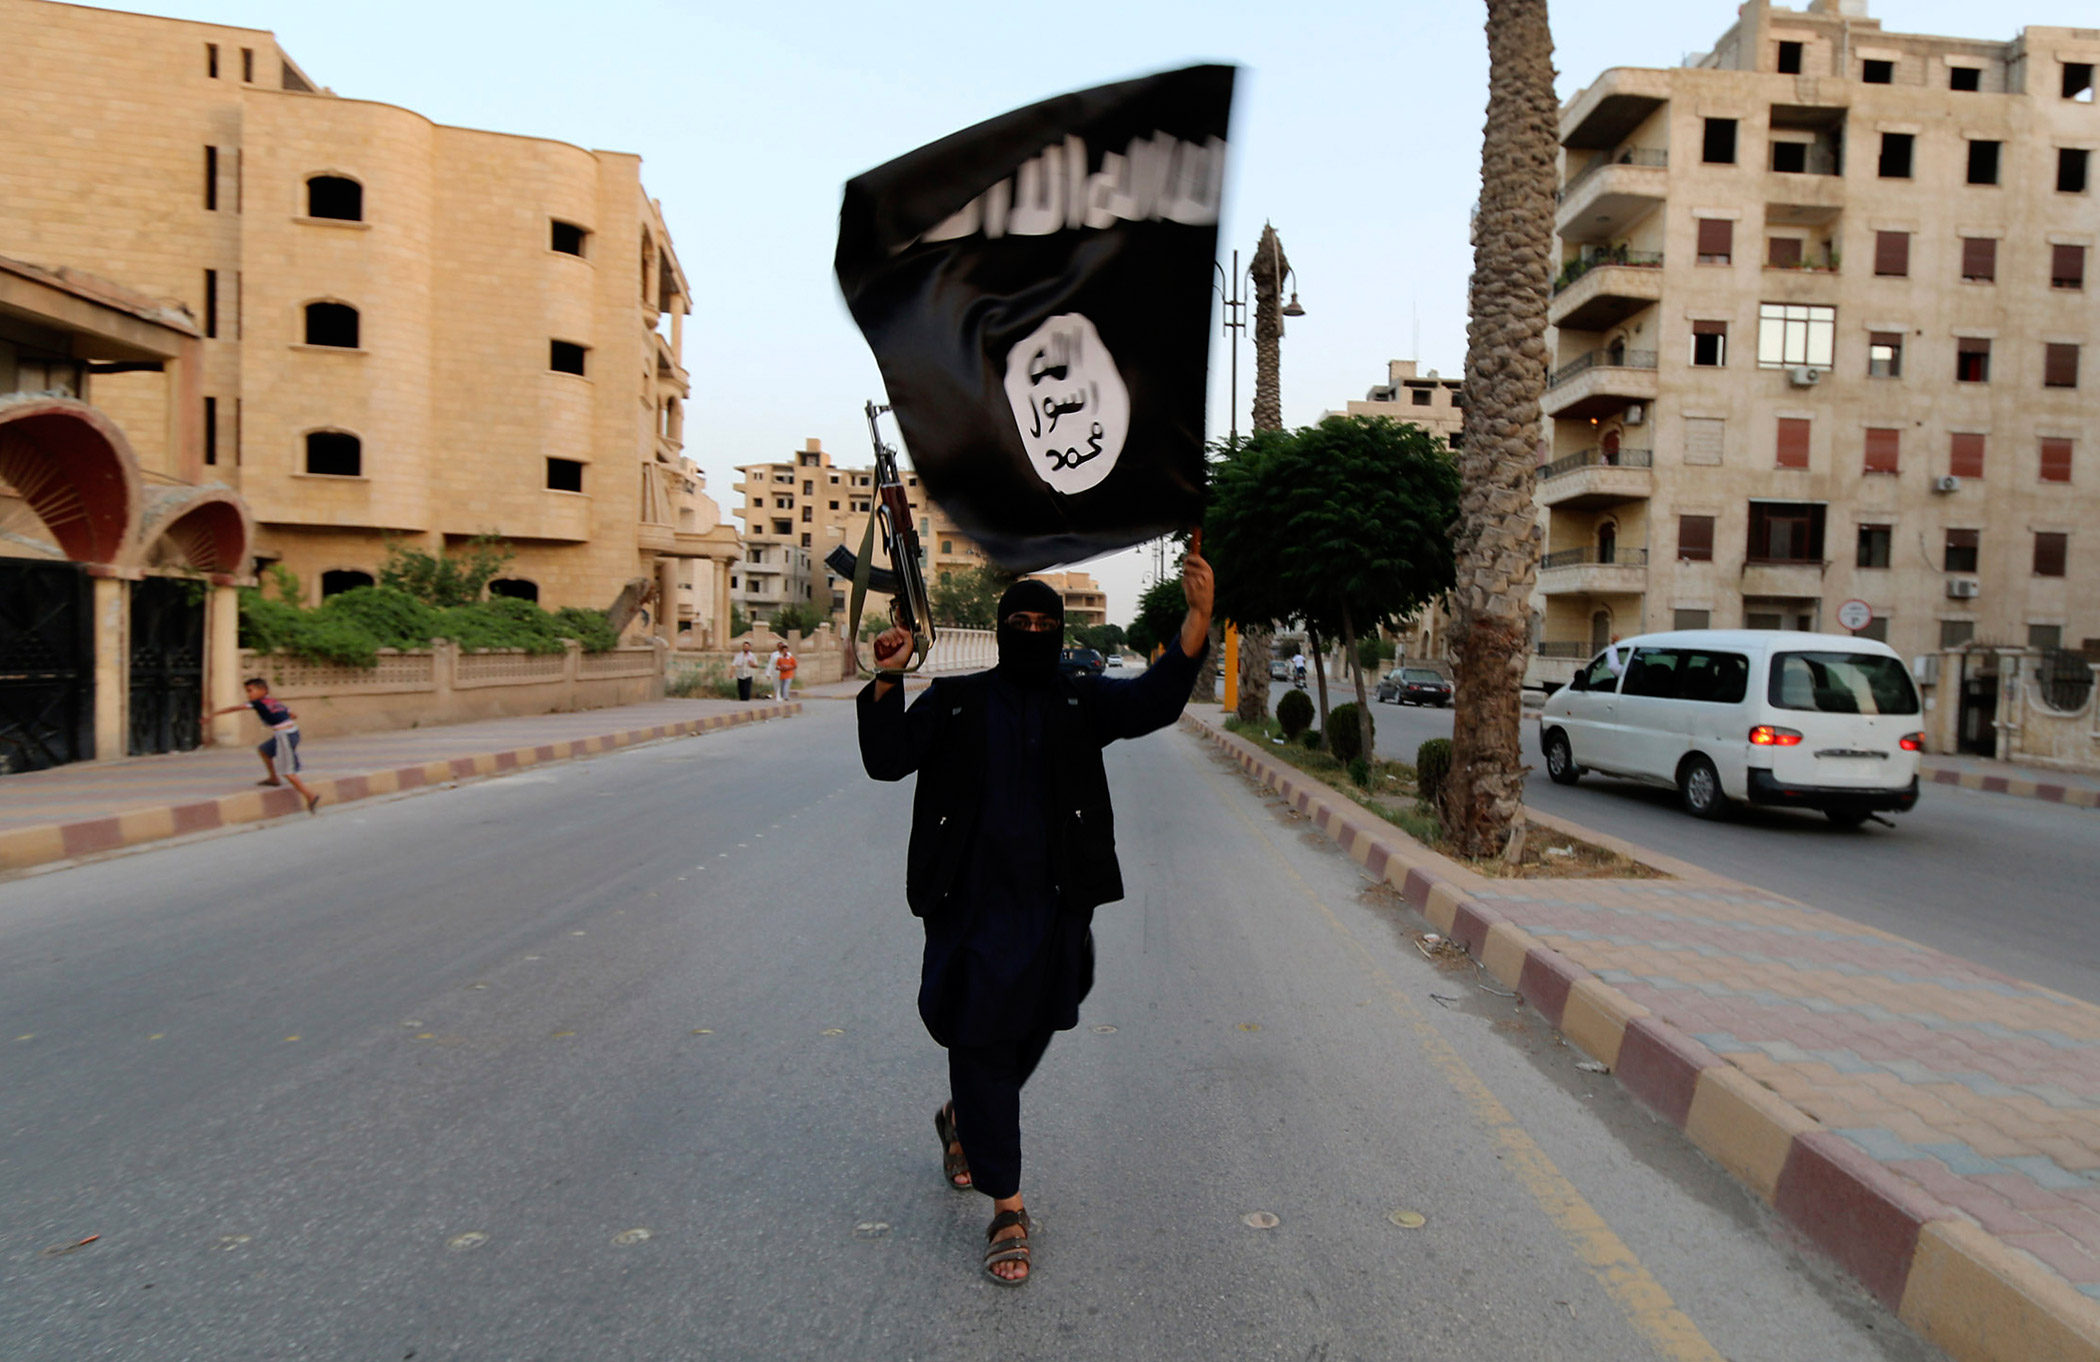 The attackers in Grenoble were said to be carrying a flag like this one being waved  in Raqqa, Syria, on June 29, 2014 (Reuters)